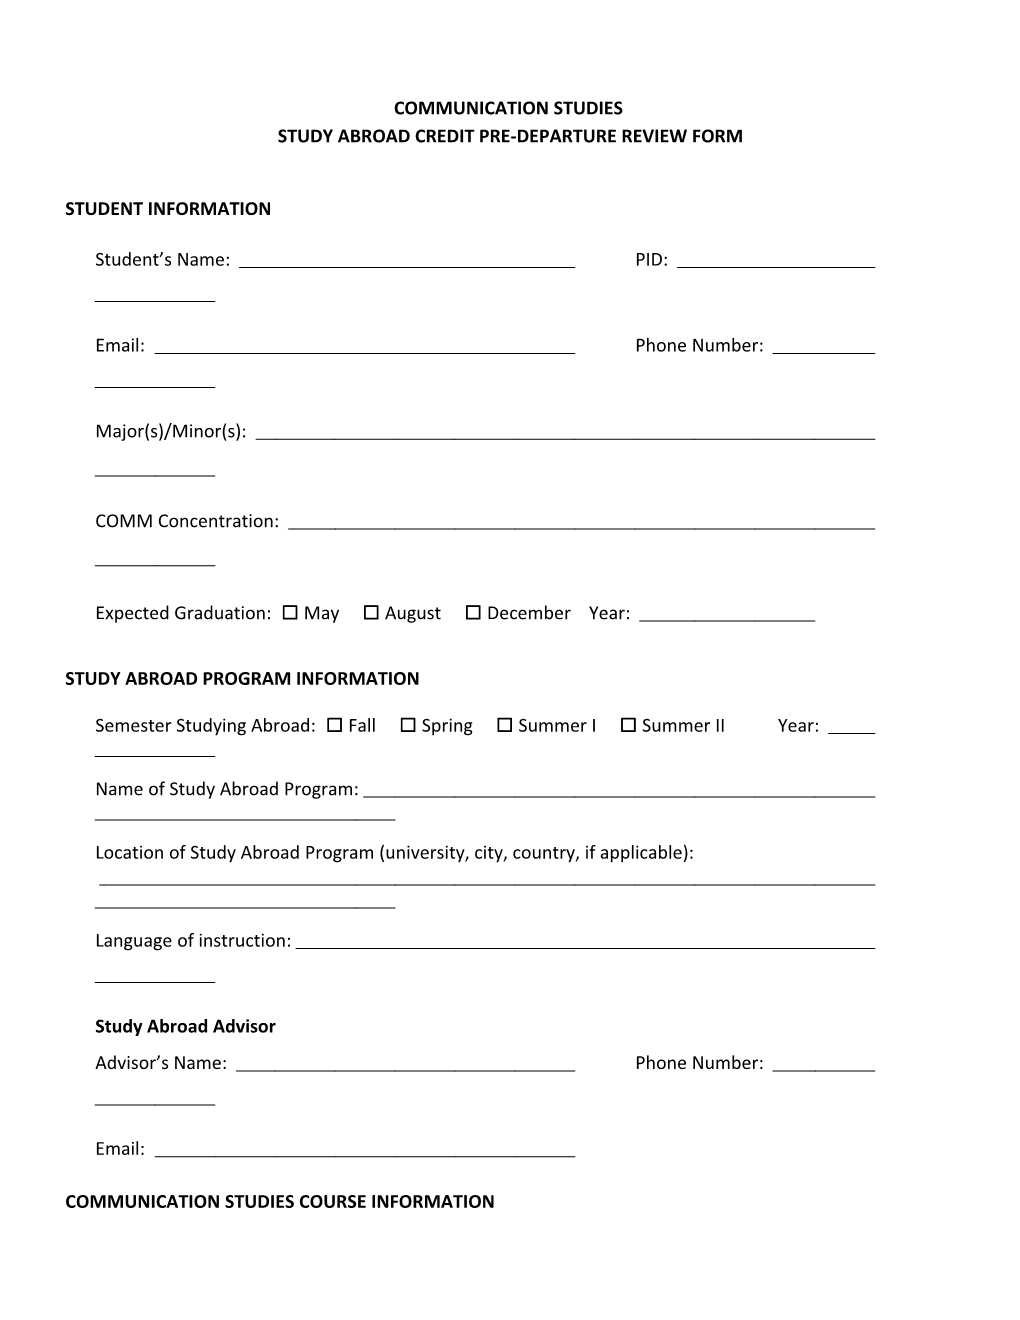 Study Abroad Credit Pre-Departure Review Form